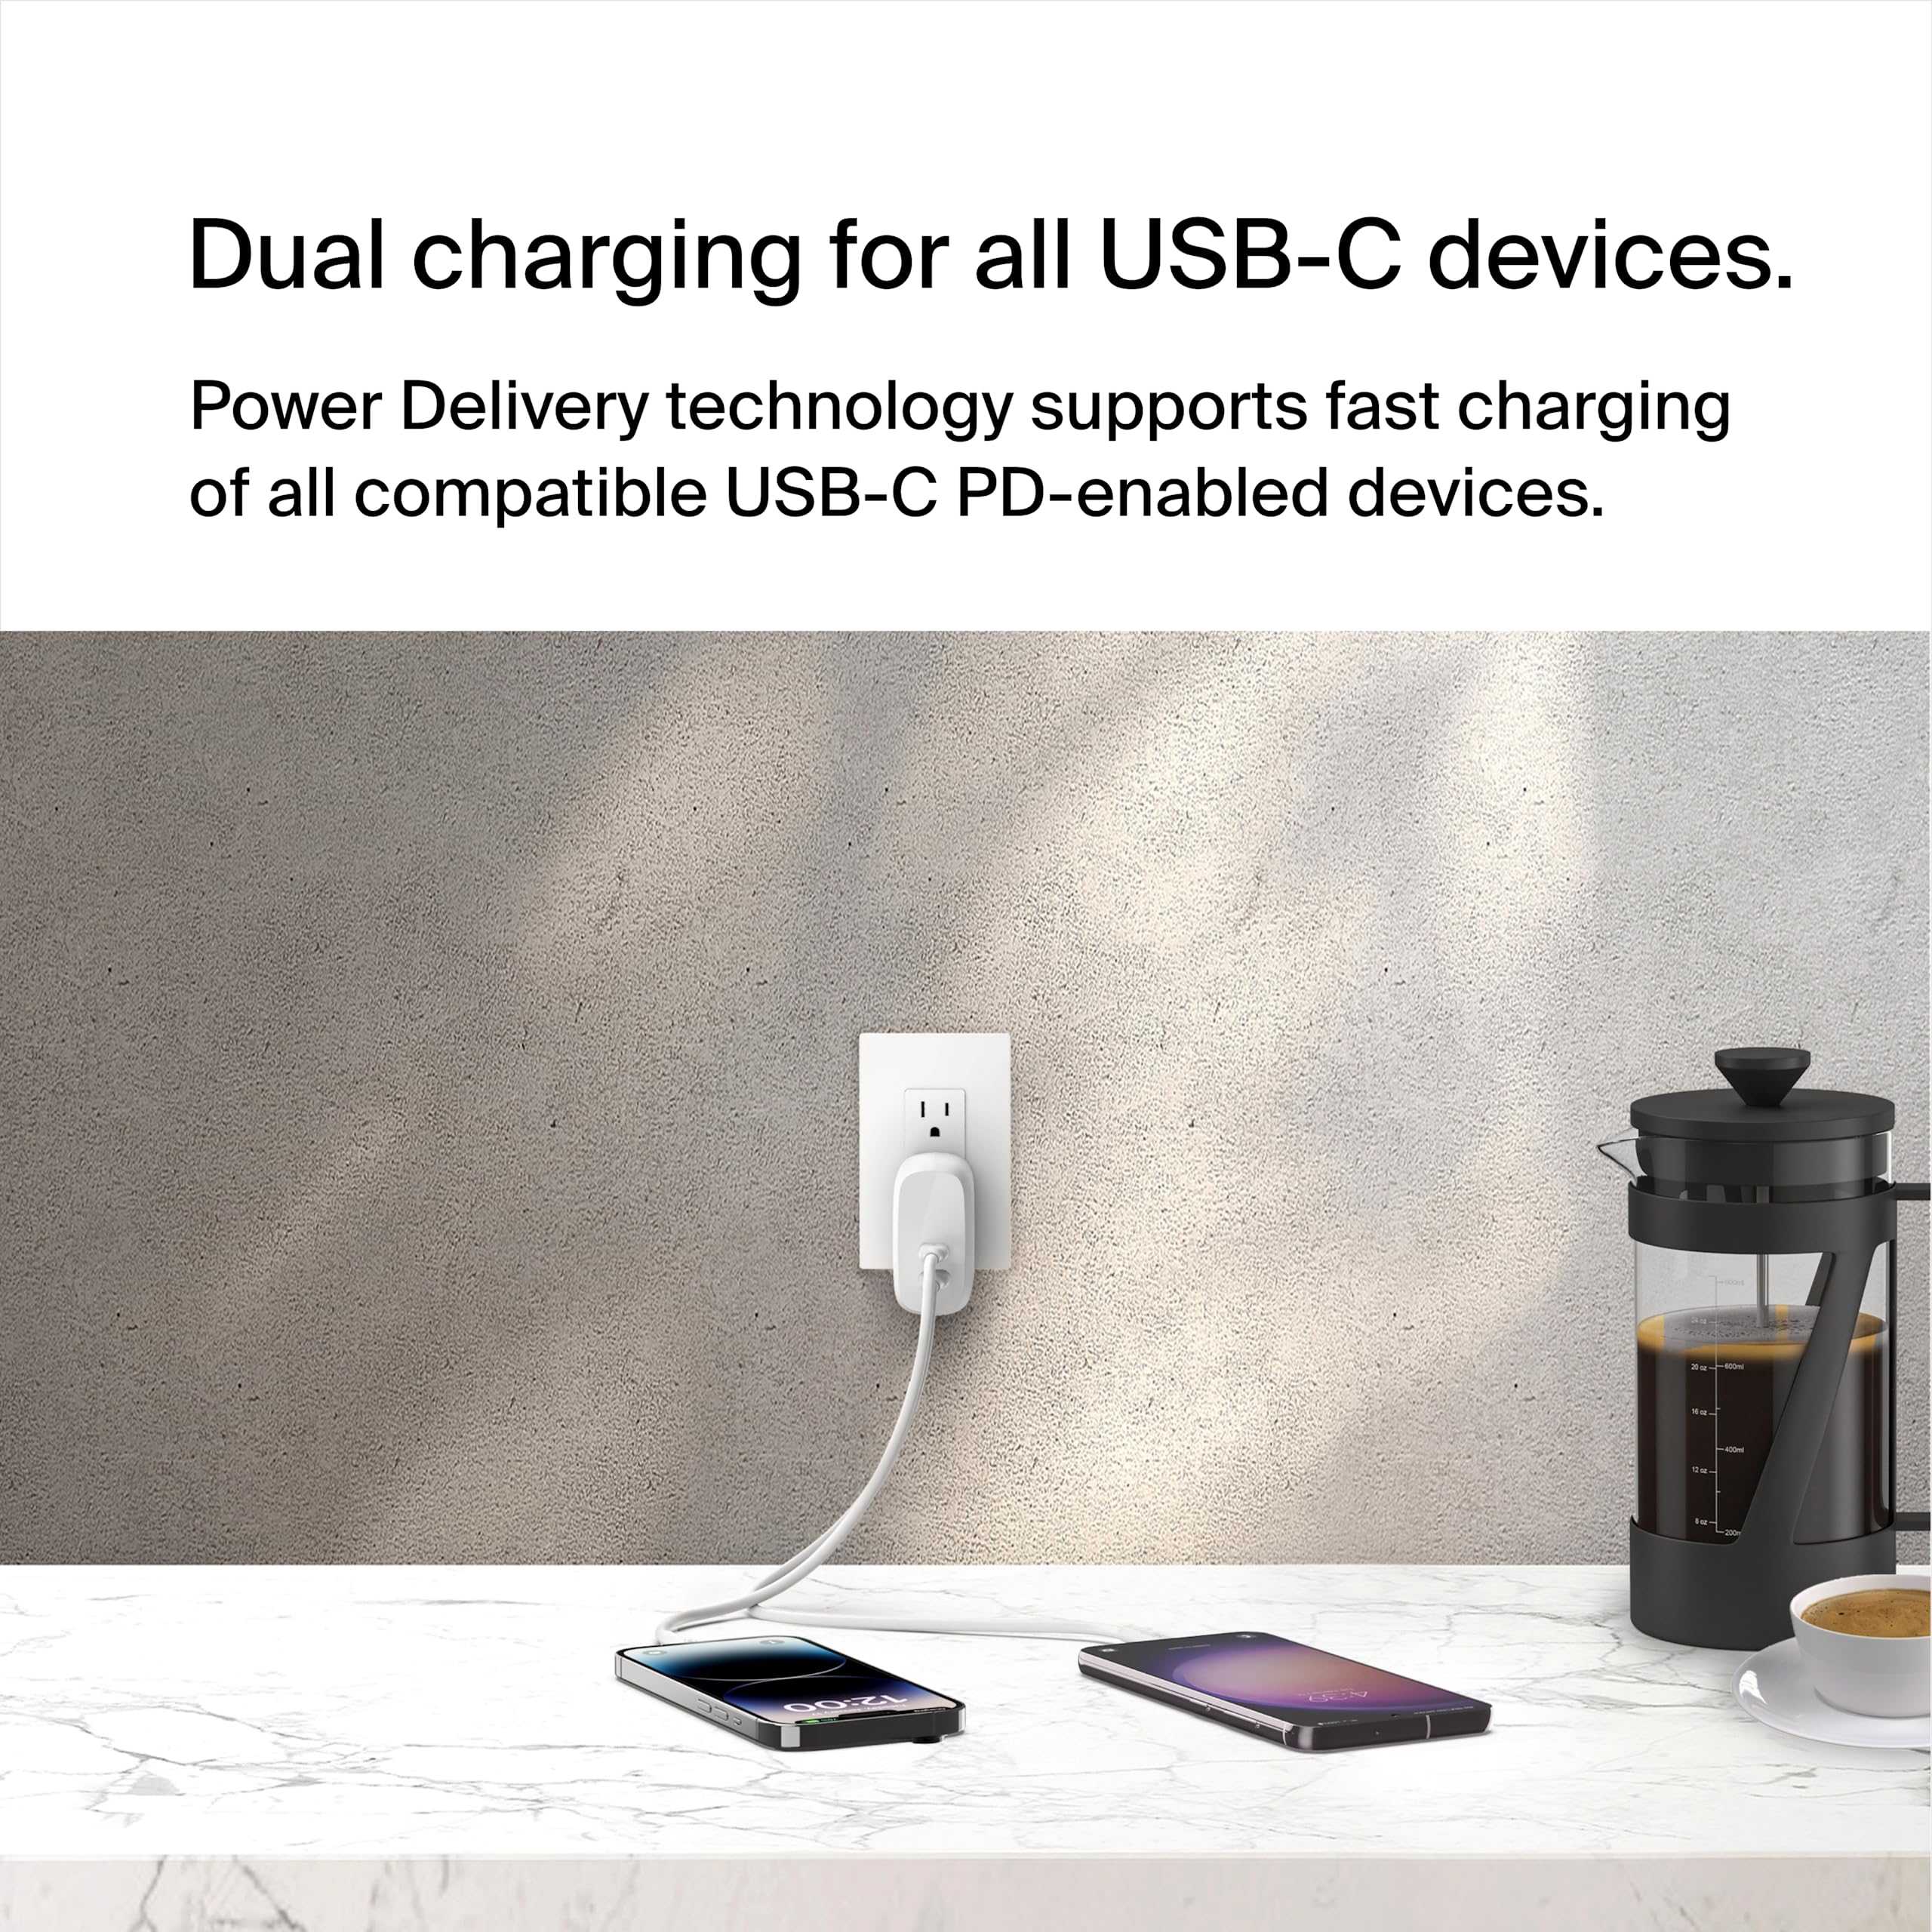 Belkin BoostCharge Dual USB-C Wall Charger with PPS 60W for Apple iPhone, iPad, Samsung Galaxy, Google Pixel - Compatible w/USB-C to Lightning Cable & USB-C to USB-C - White (2-Pack)